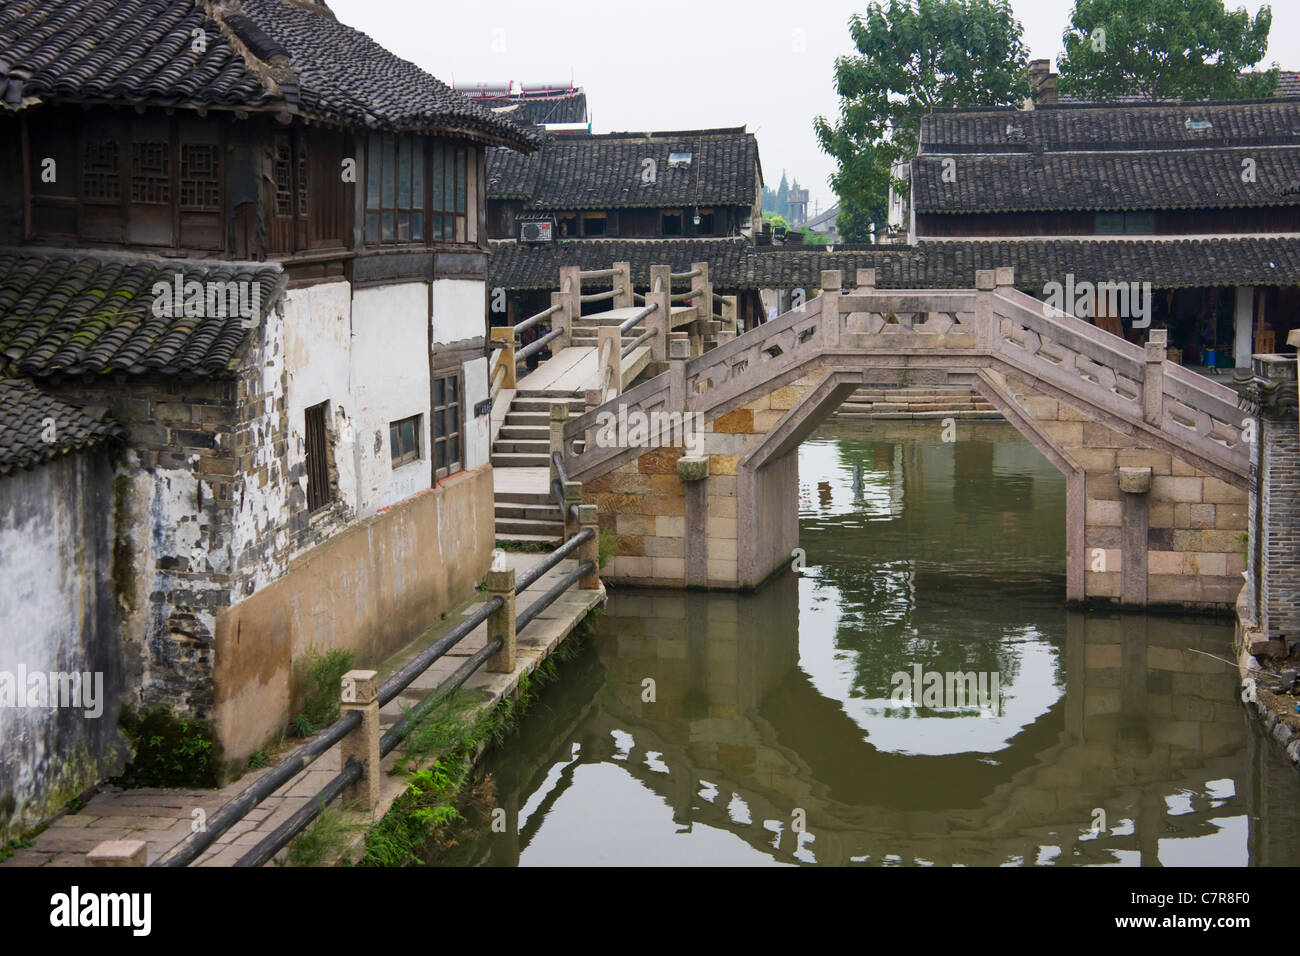 Old residence and stone bridge on the Grand Canal, Xitang, Zhejiang Province, China Stock Photo